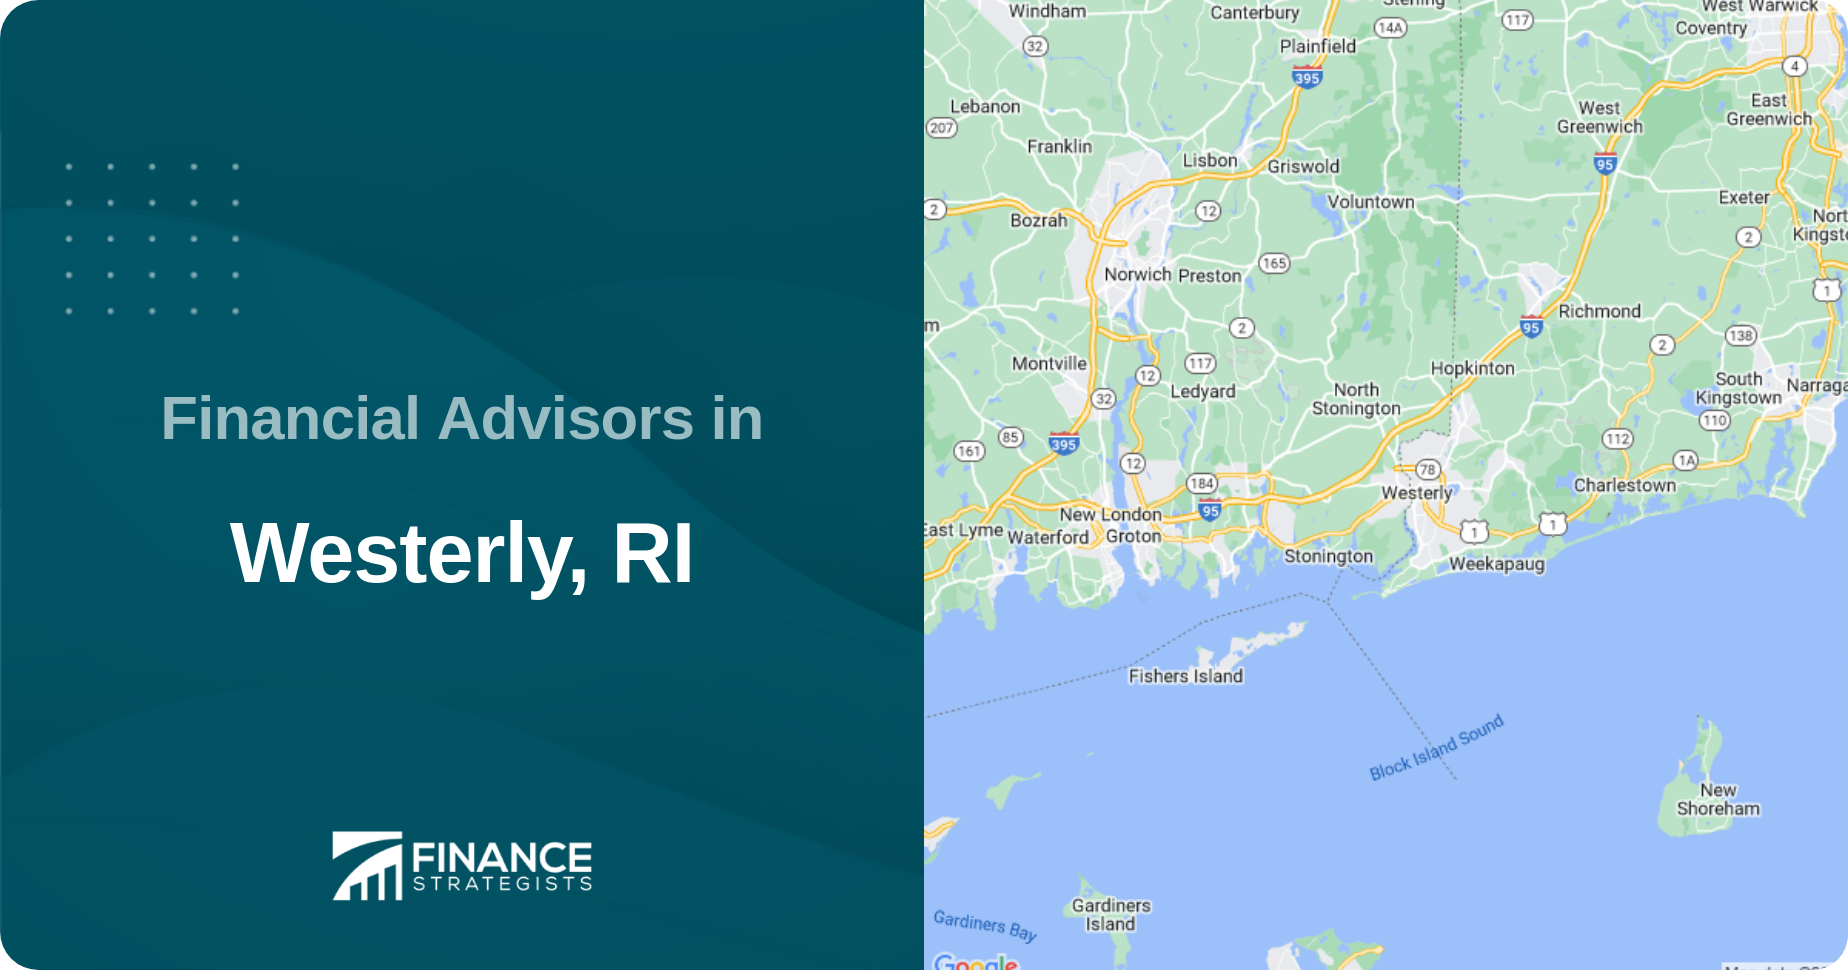 Financial Advisors in Westerly, RI